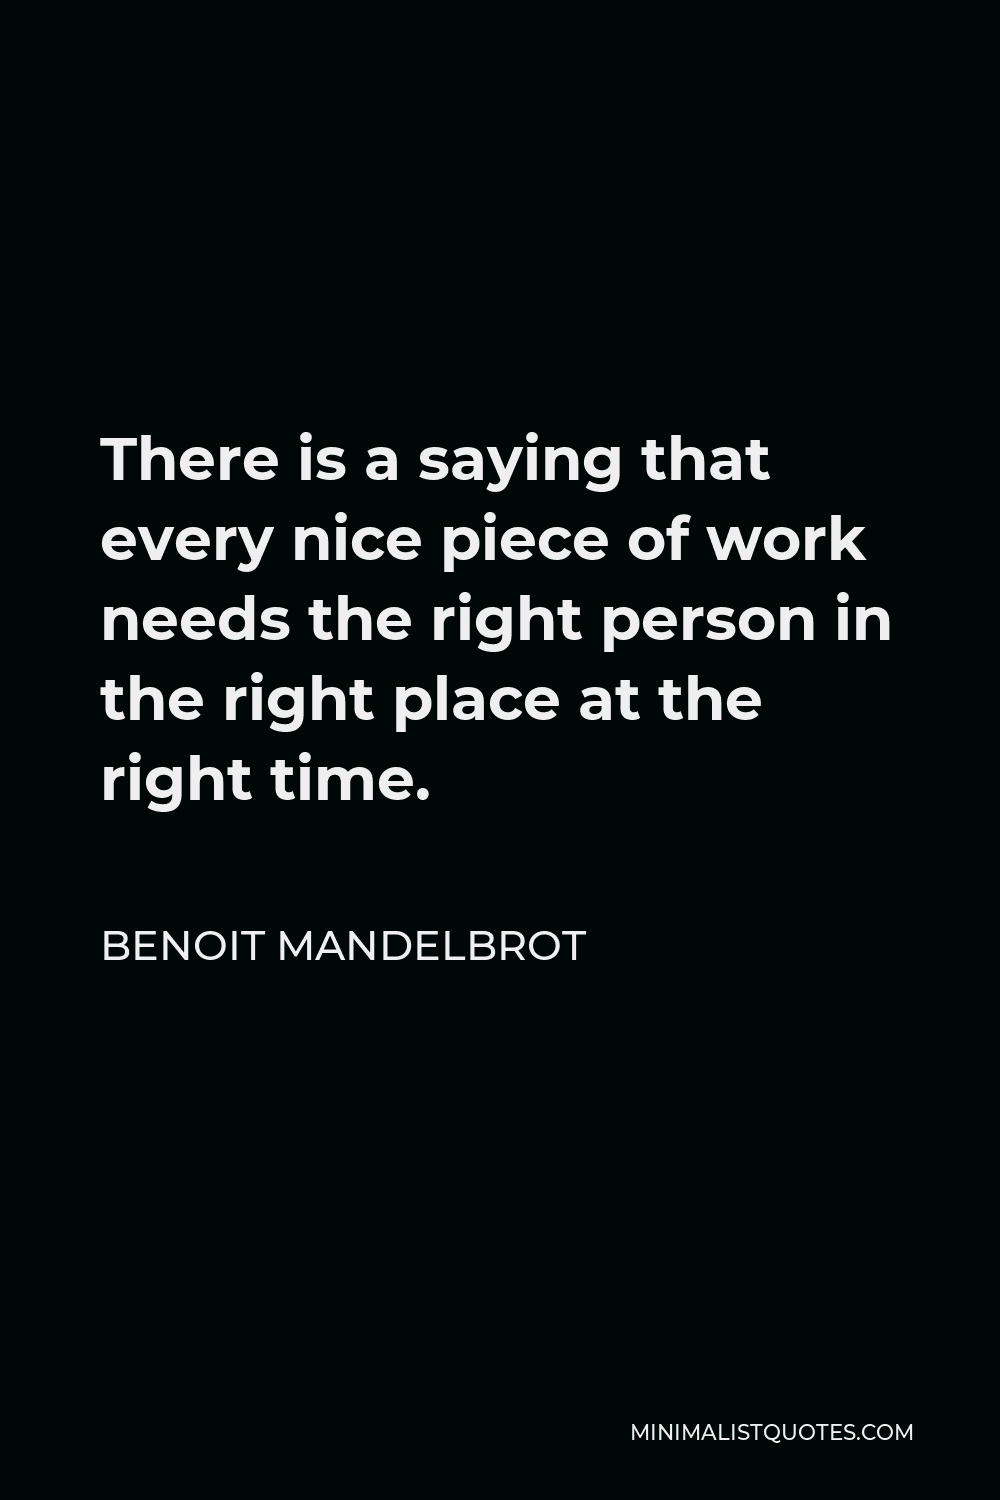 Benoit Mandelbrot Quote - There is a saying that every nice piece of work needs the right person in the right place at the right time.